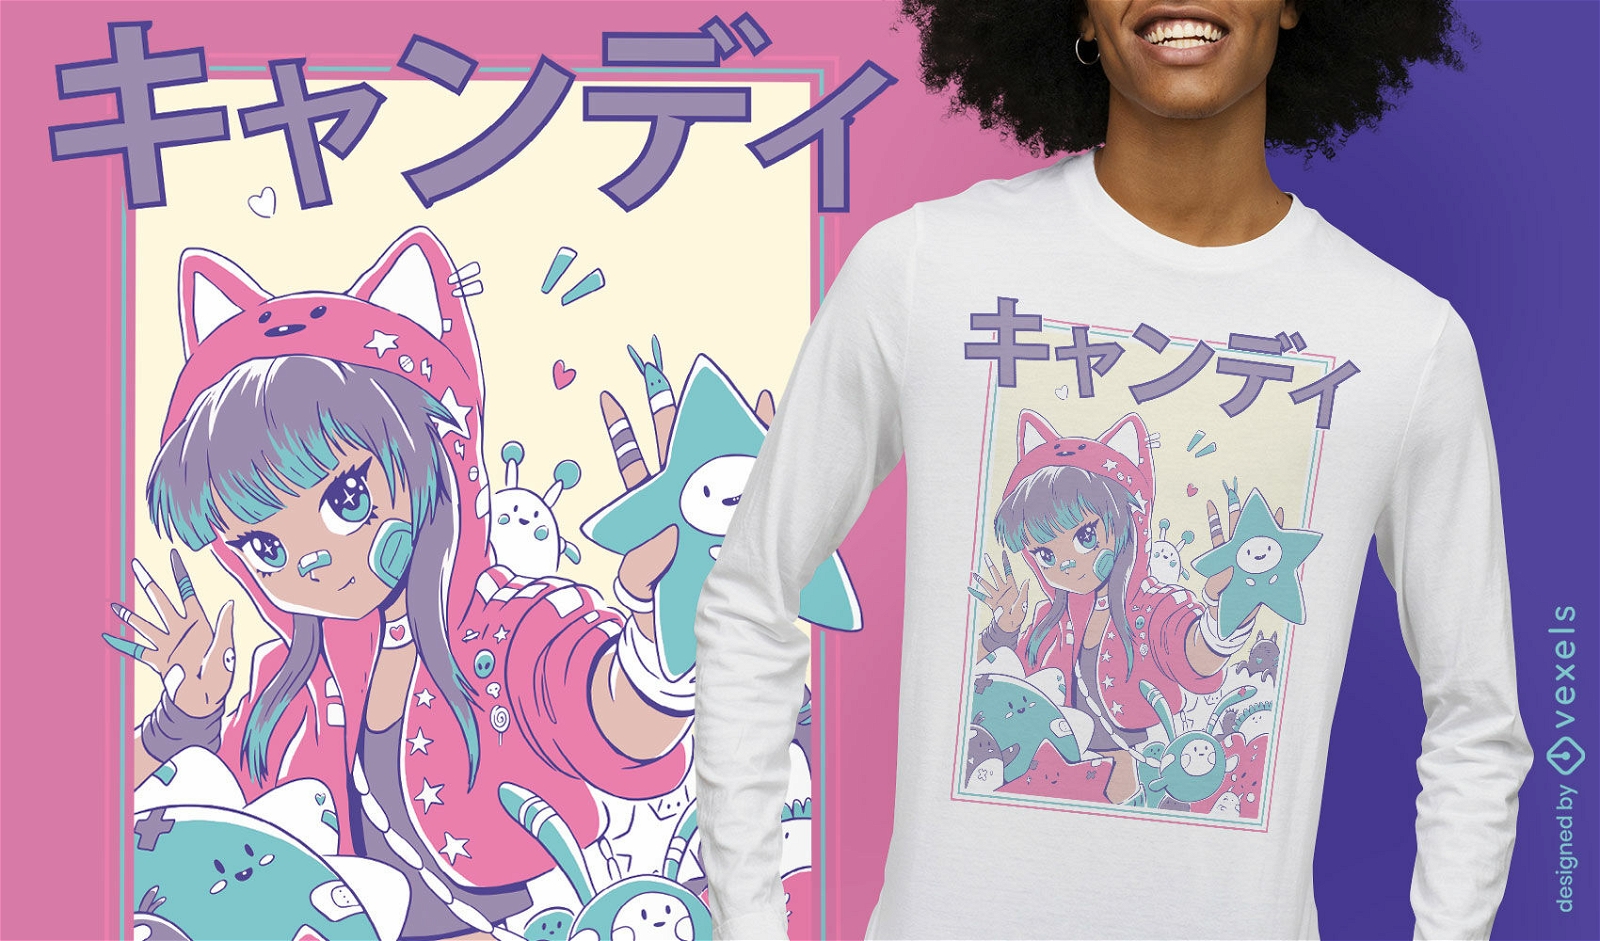 Cute anime girl with hoodie t-shirt design